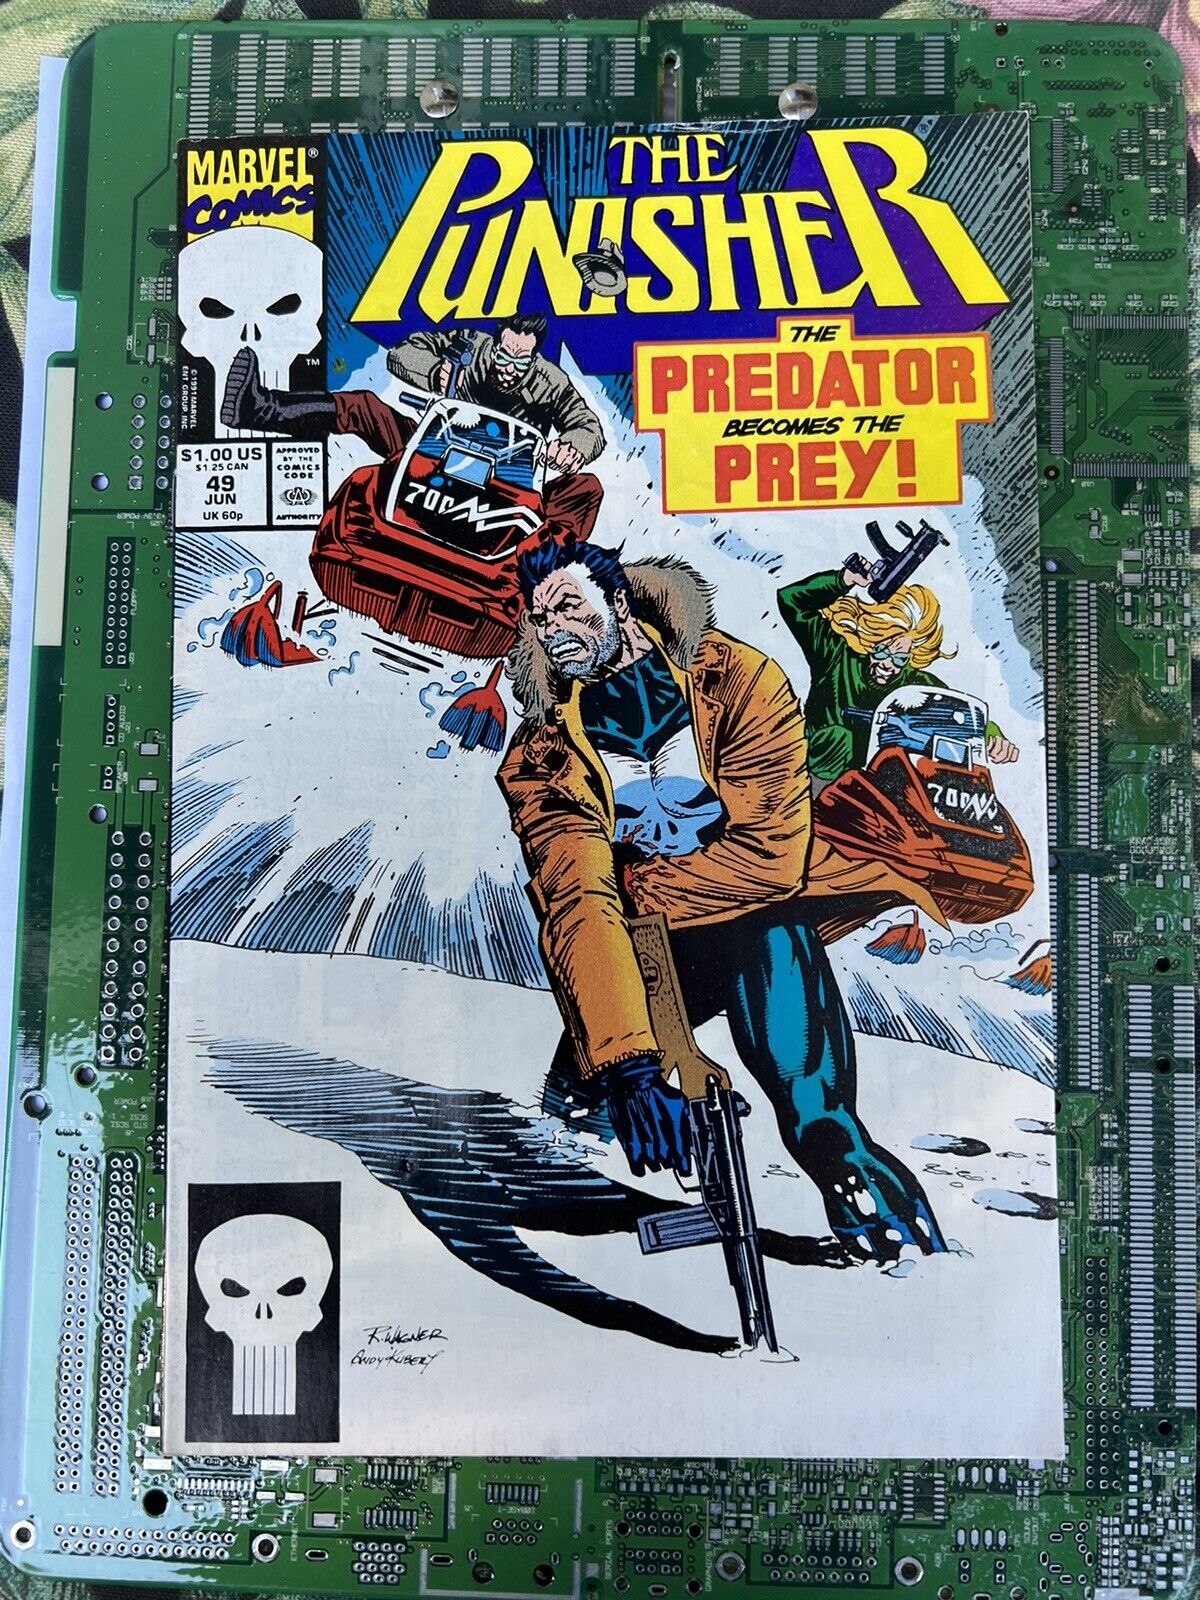 The Punisher Issue 29 Comic Book Marvel Comics June 1991